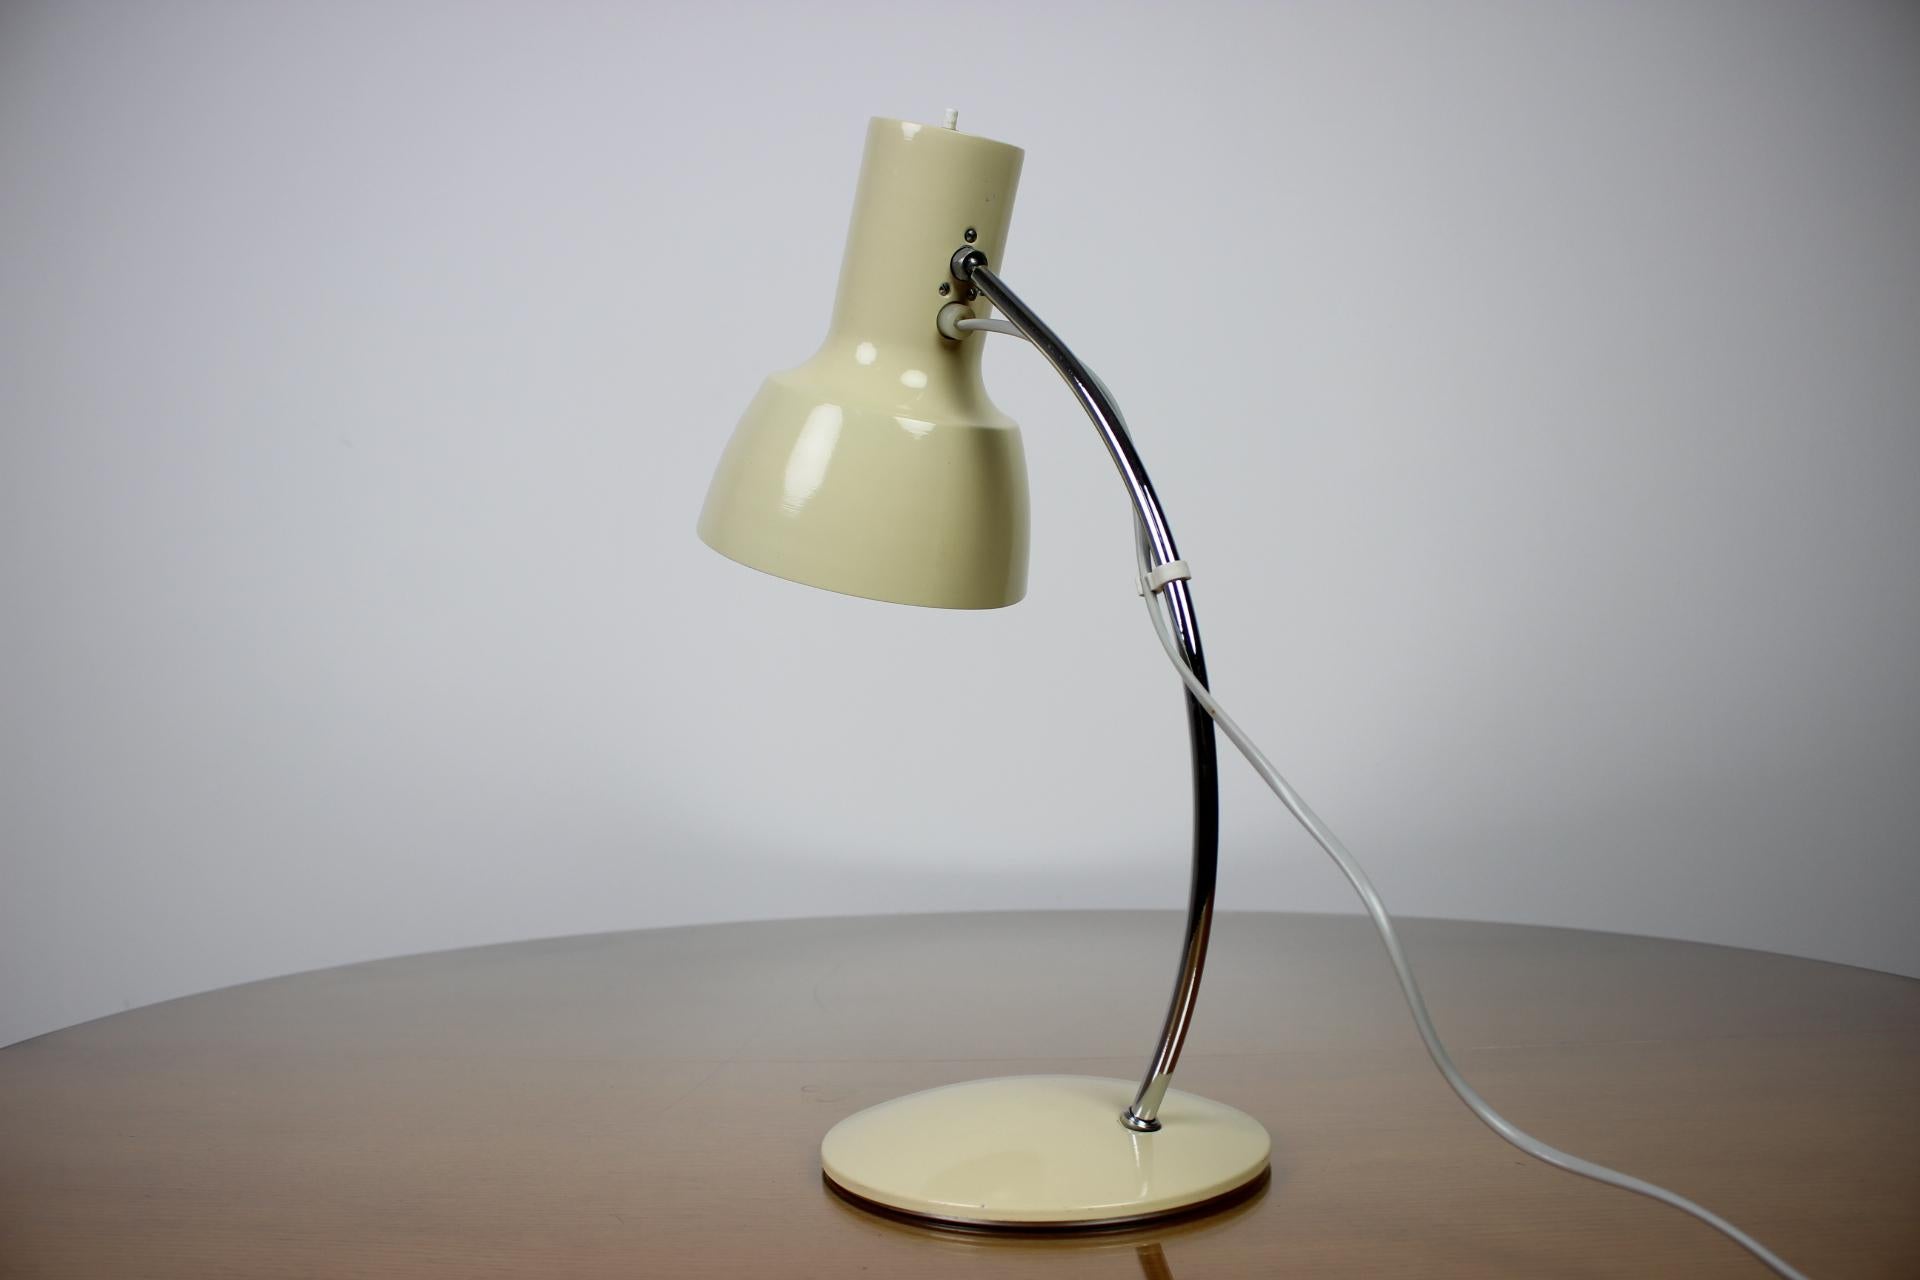 - Made in Czechoslovakia
- Made of metal
- Re-polished
- Fully functional
- 1x E26 or E27 socket
- Good, original condition.